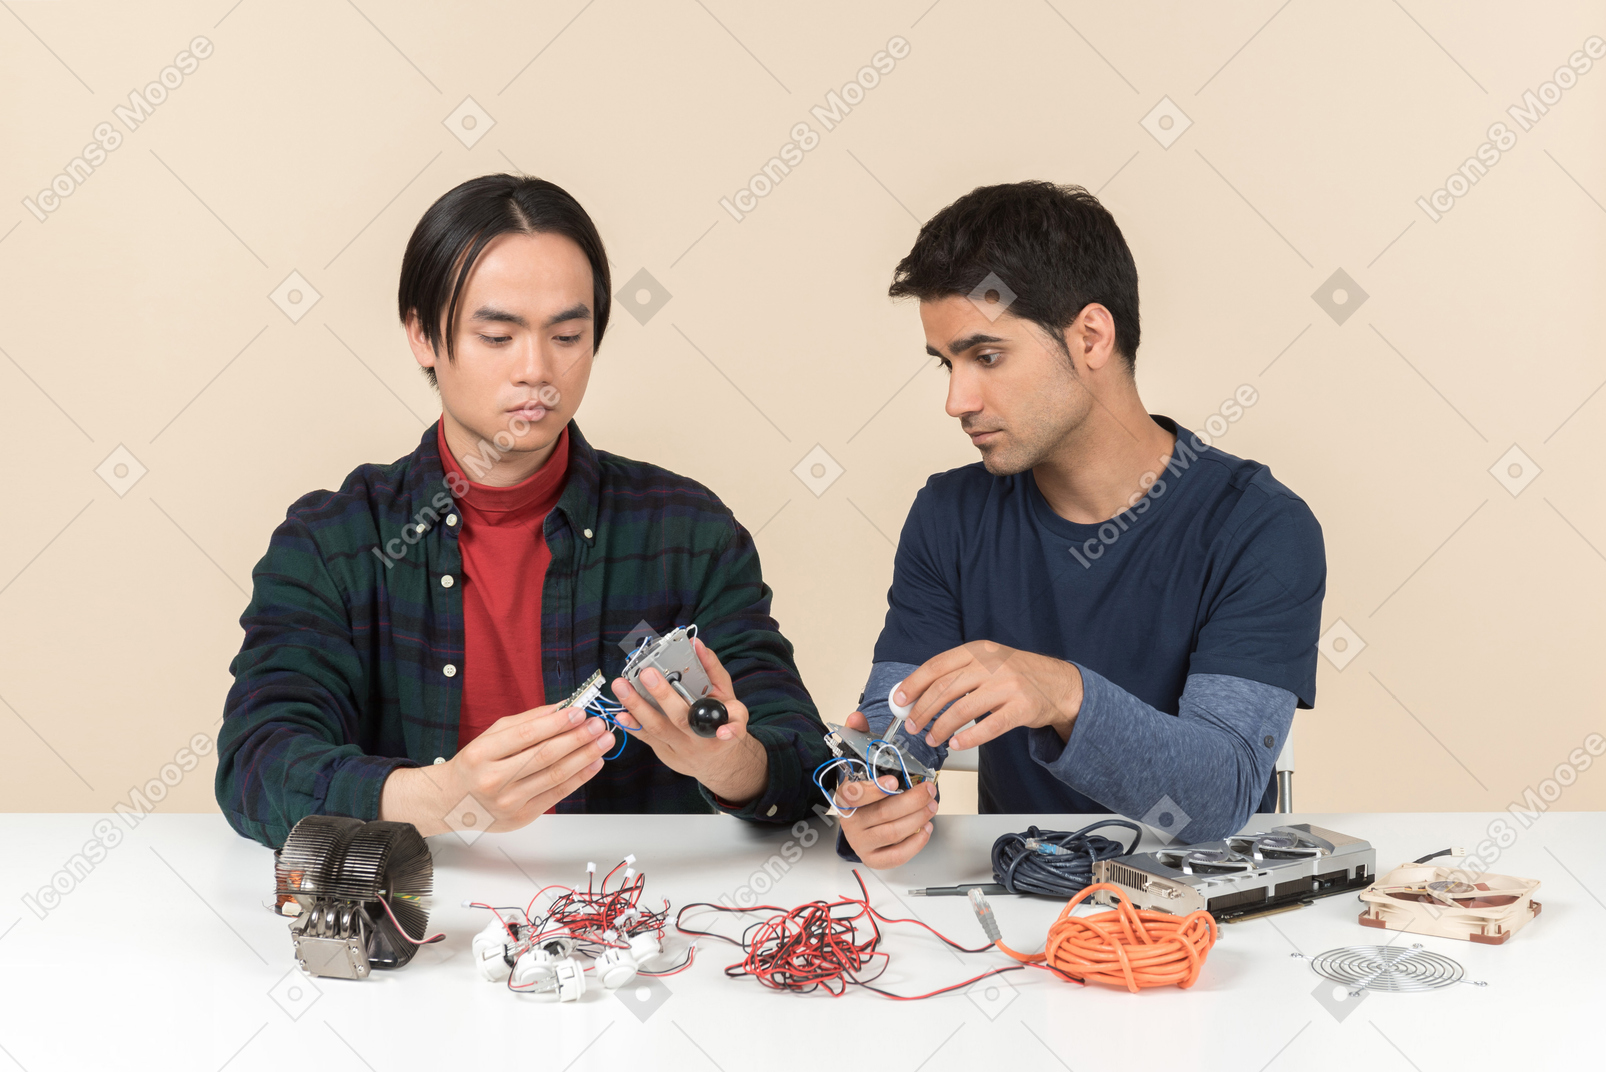 Two young geeks sitting at the table and fixing some details